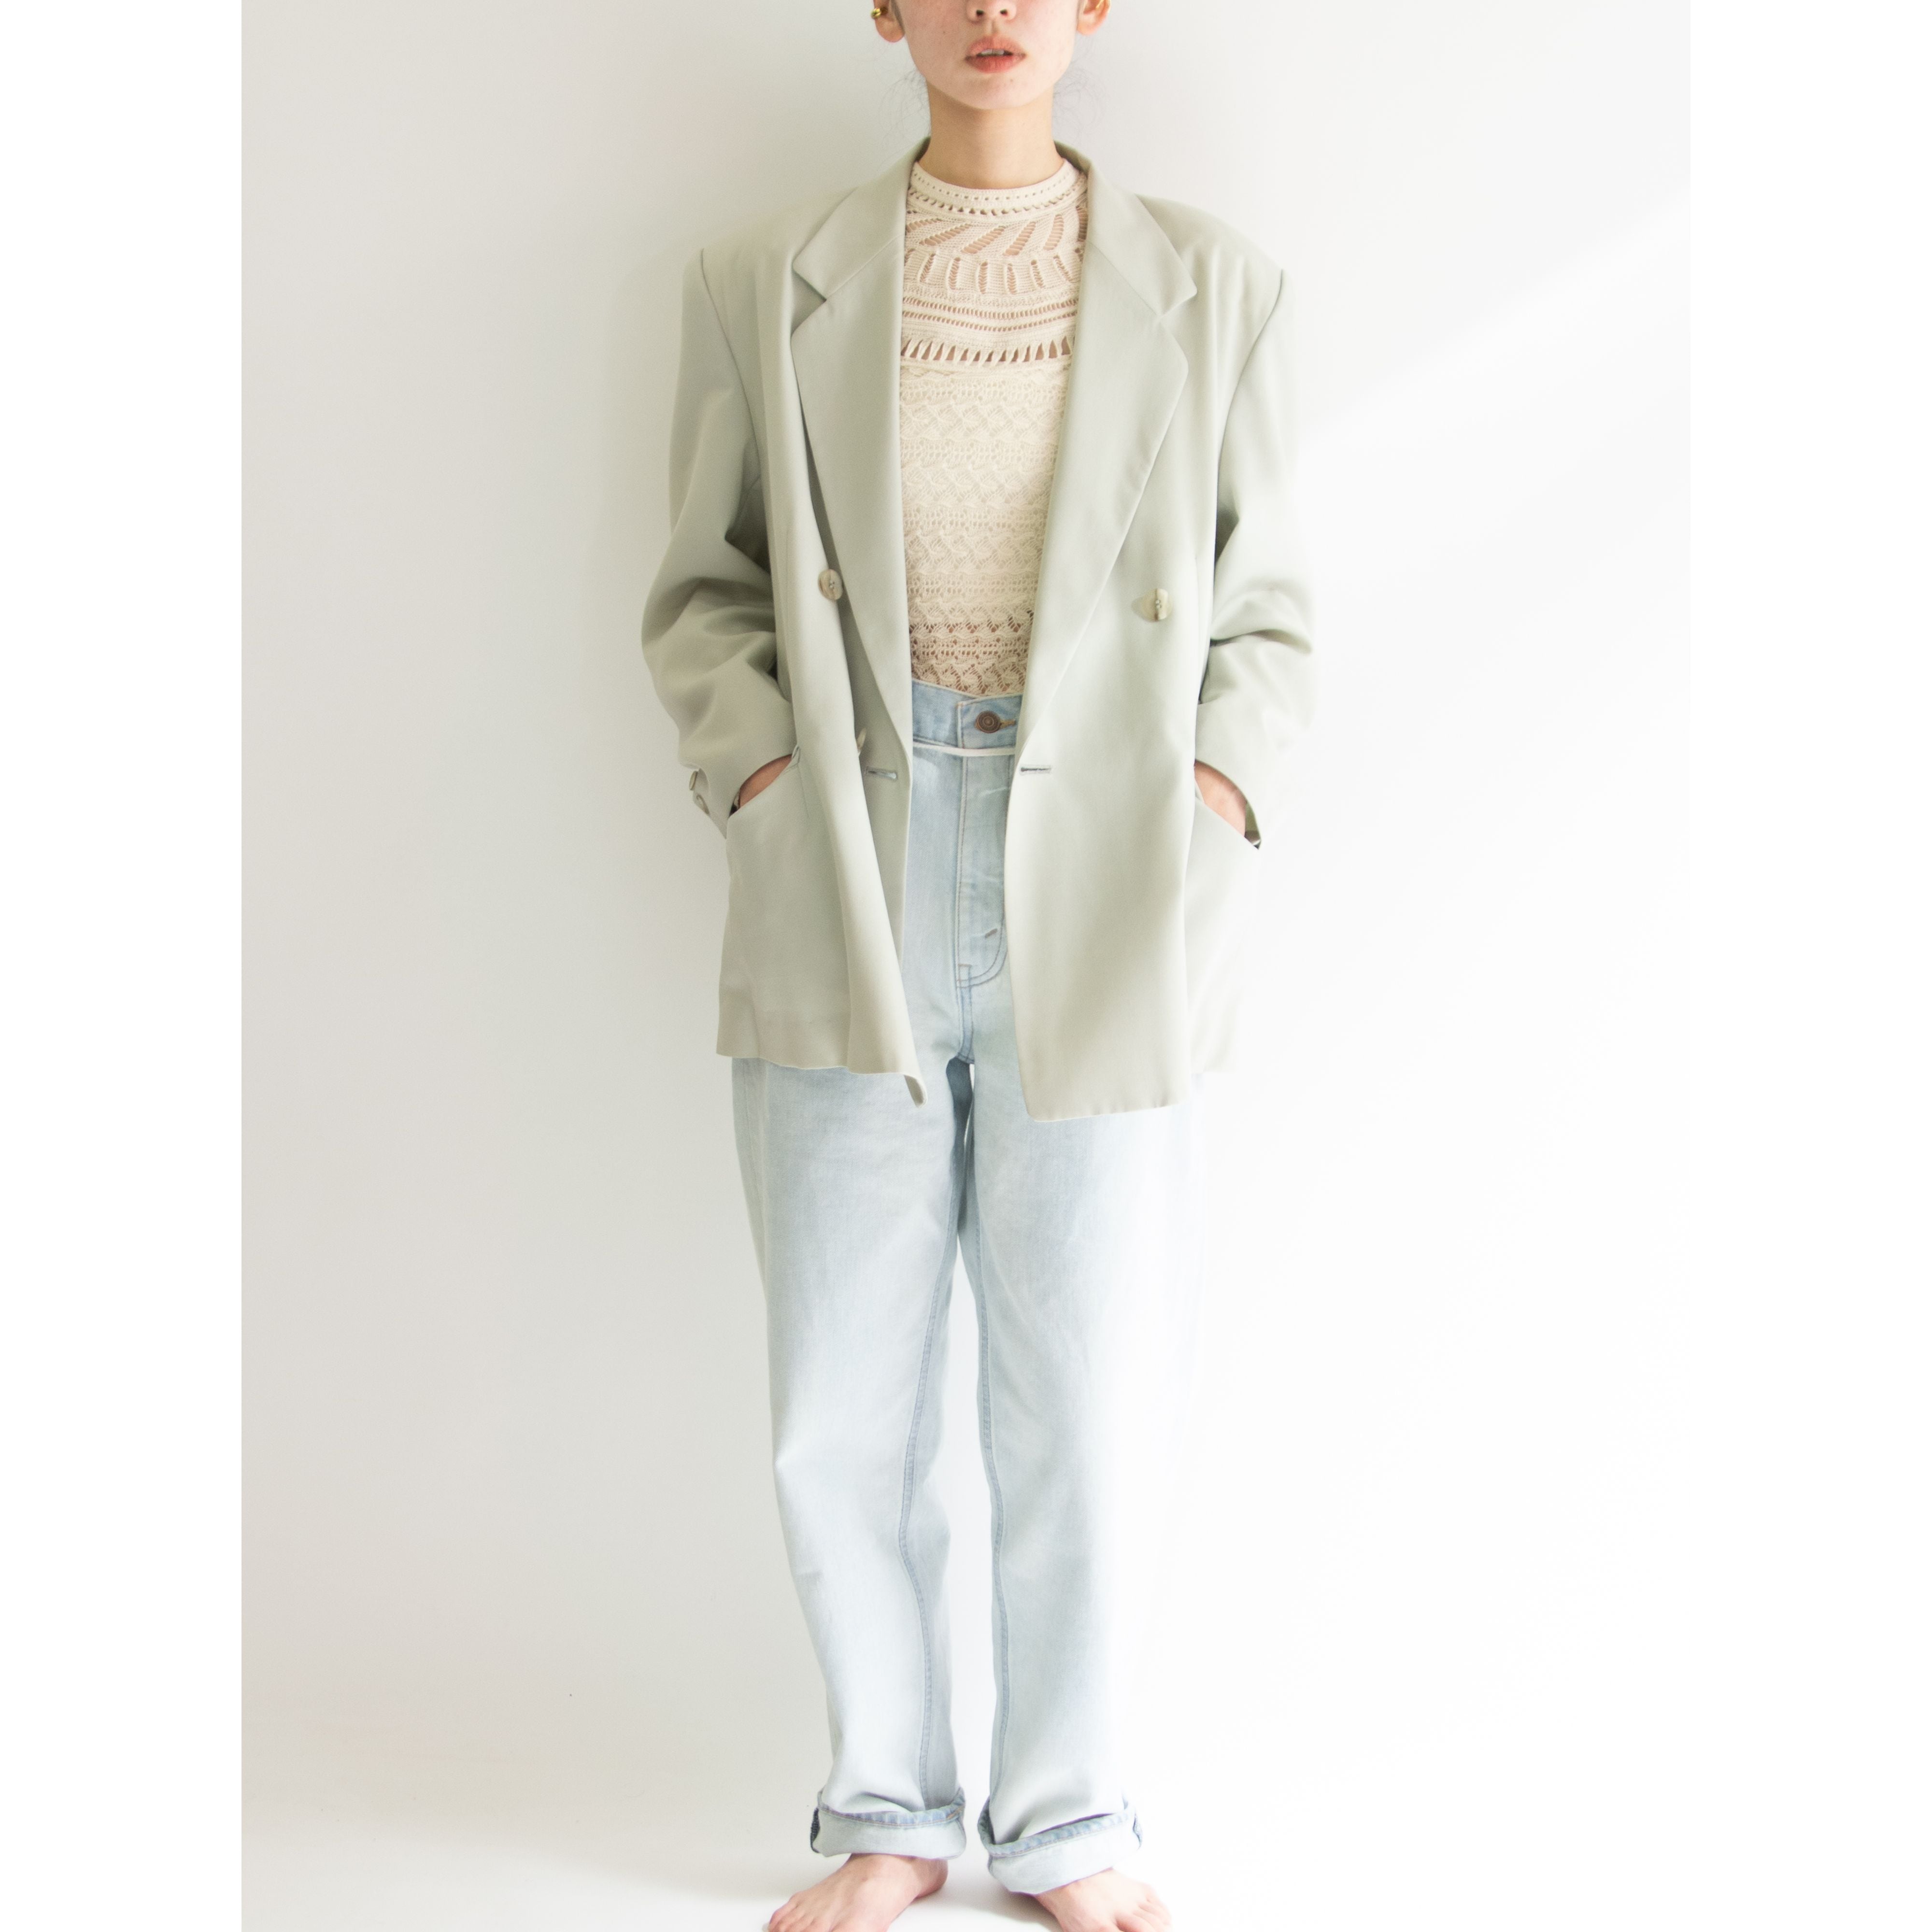 I.S. ISSEY MIYAKEMade in Japan 's % Wool Double Jacket